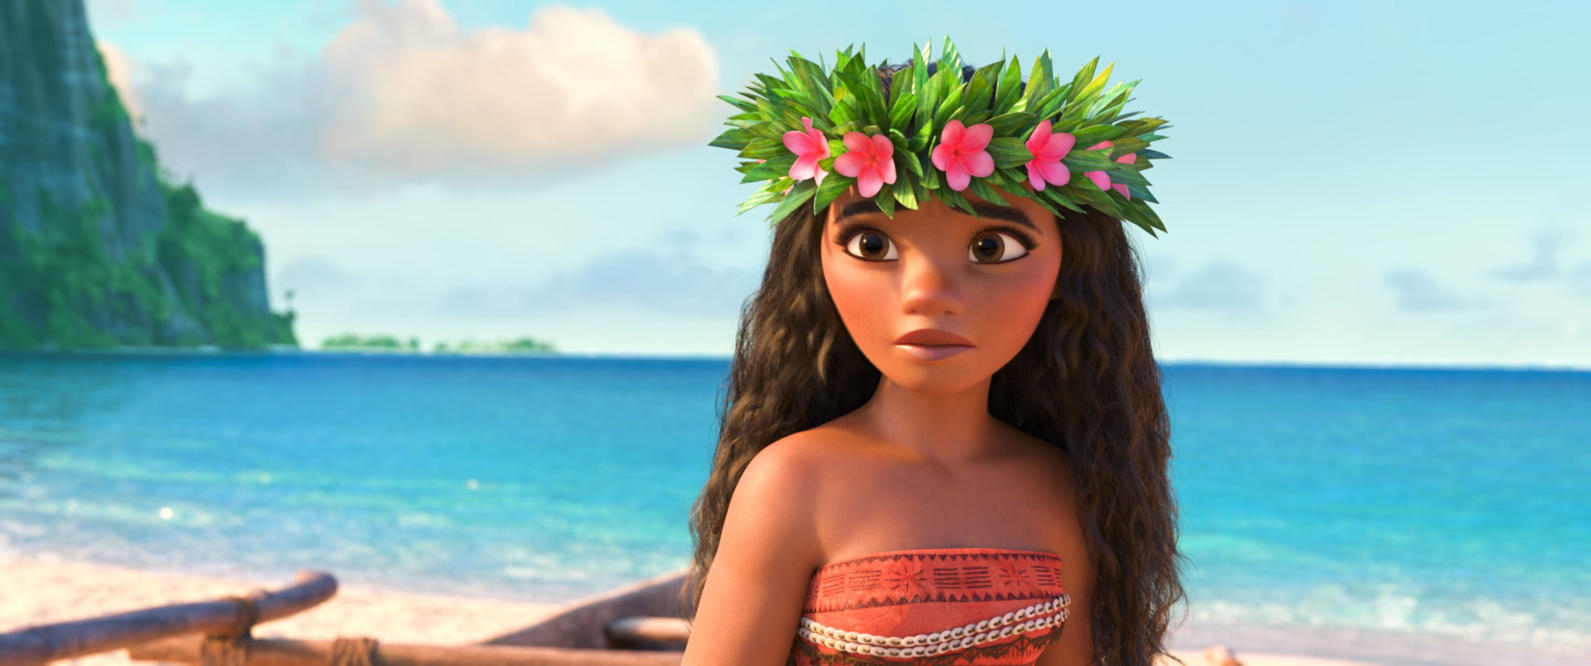 Moana' Live-Action Movie Announced: Everything We Know - Parade